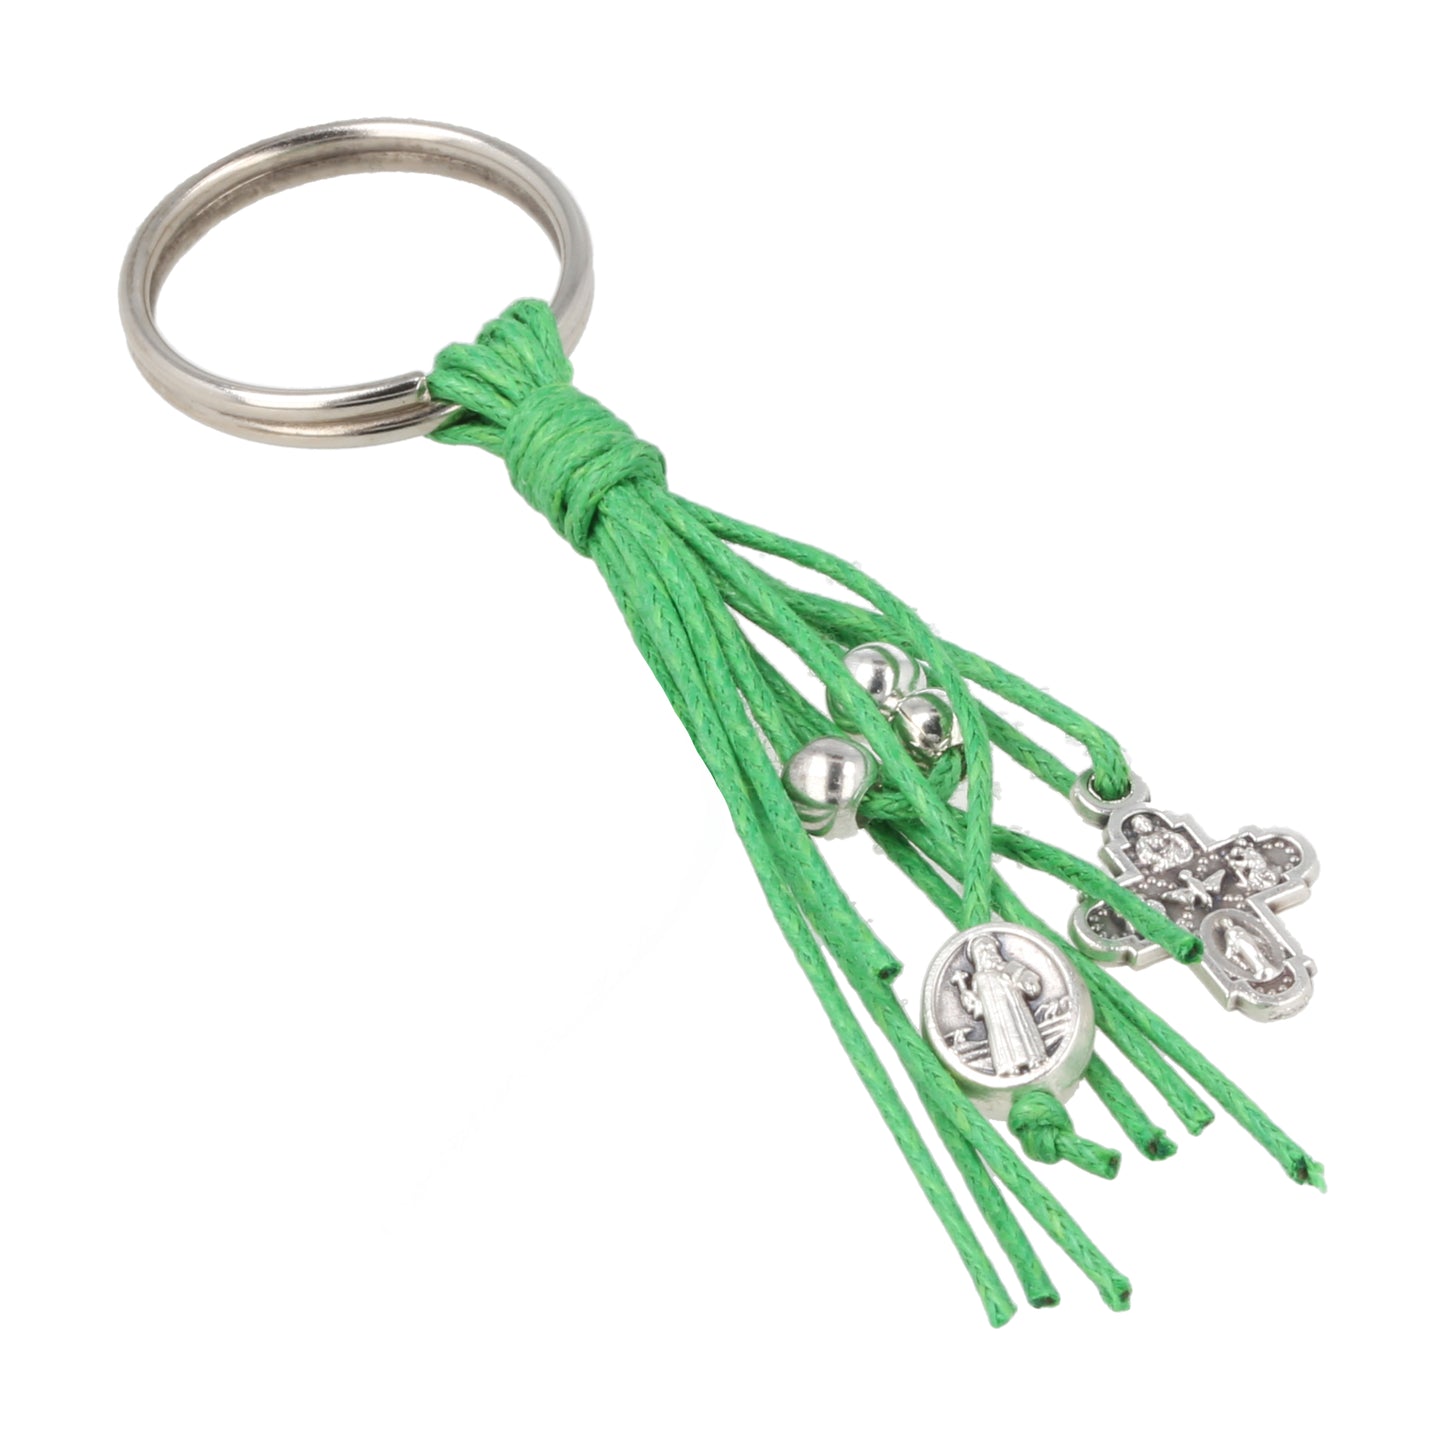 Keychain Silver Metal Color Rope Green Cross. Souvenirs from Italy